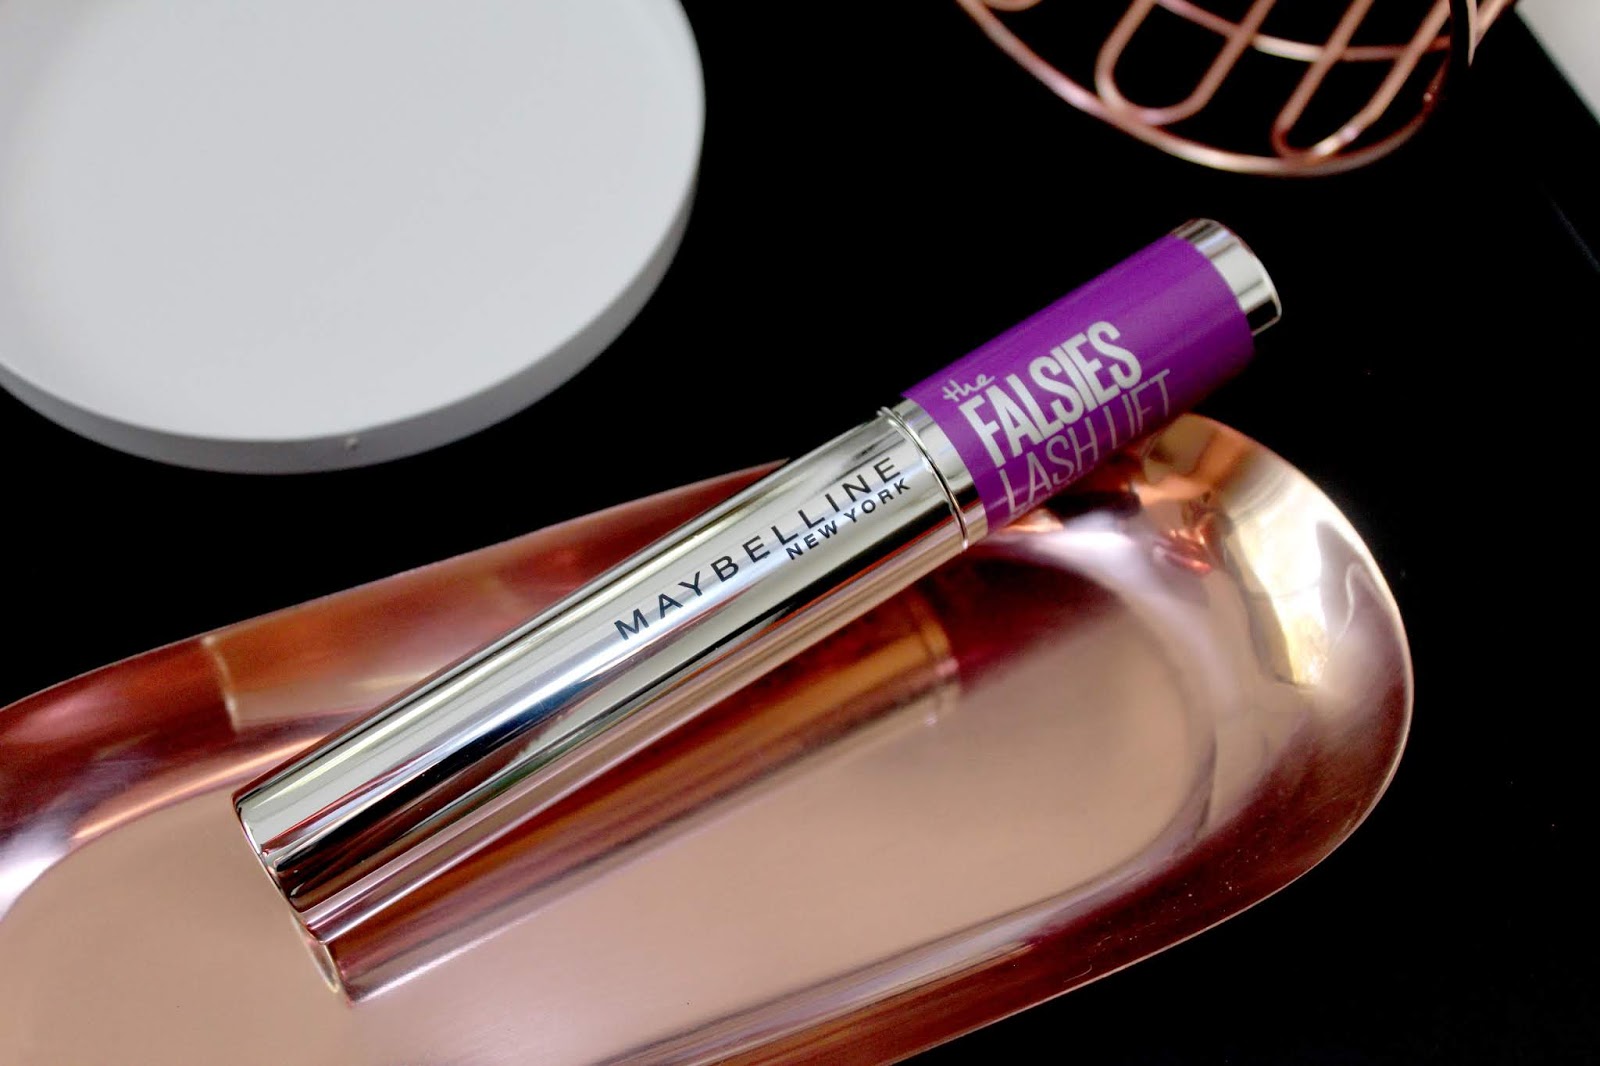 The Lash Falsies Review: Maybelline Lift